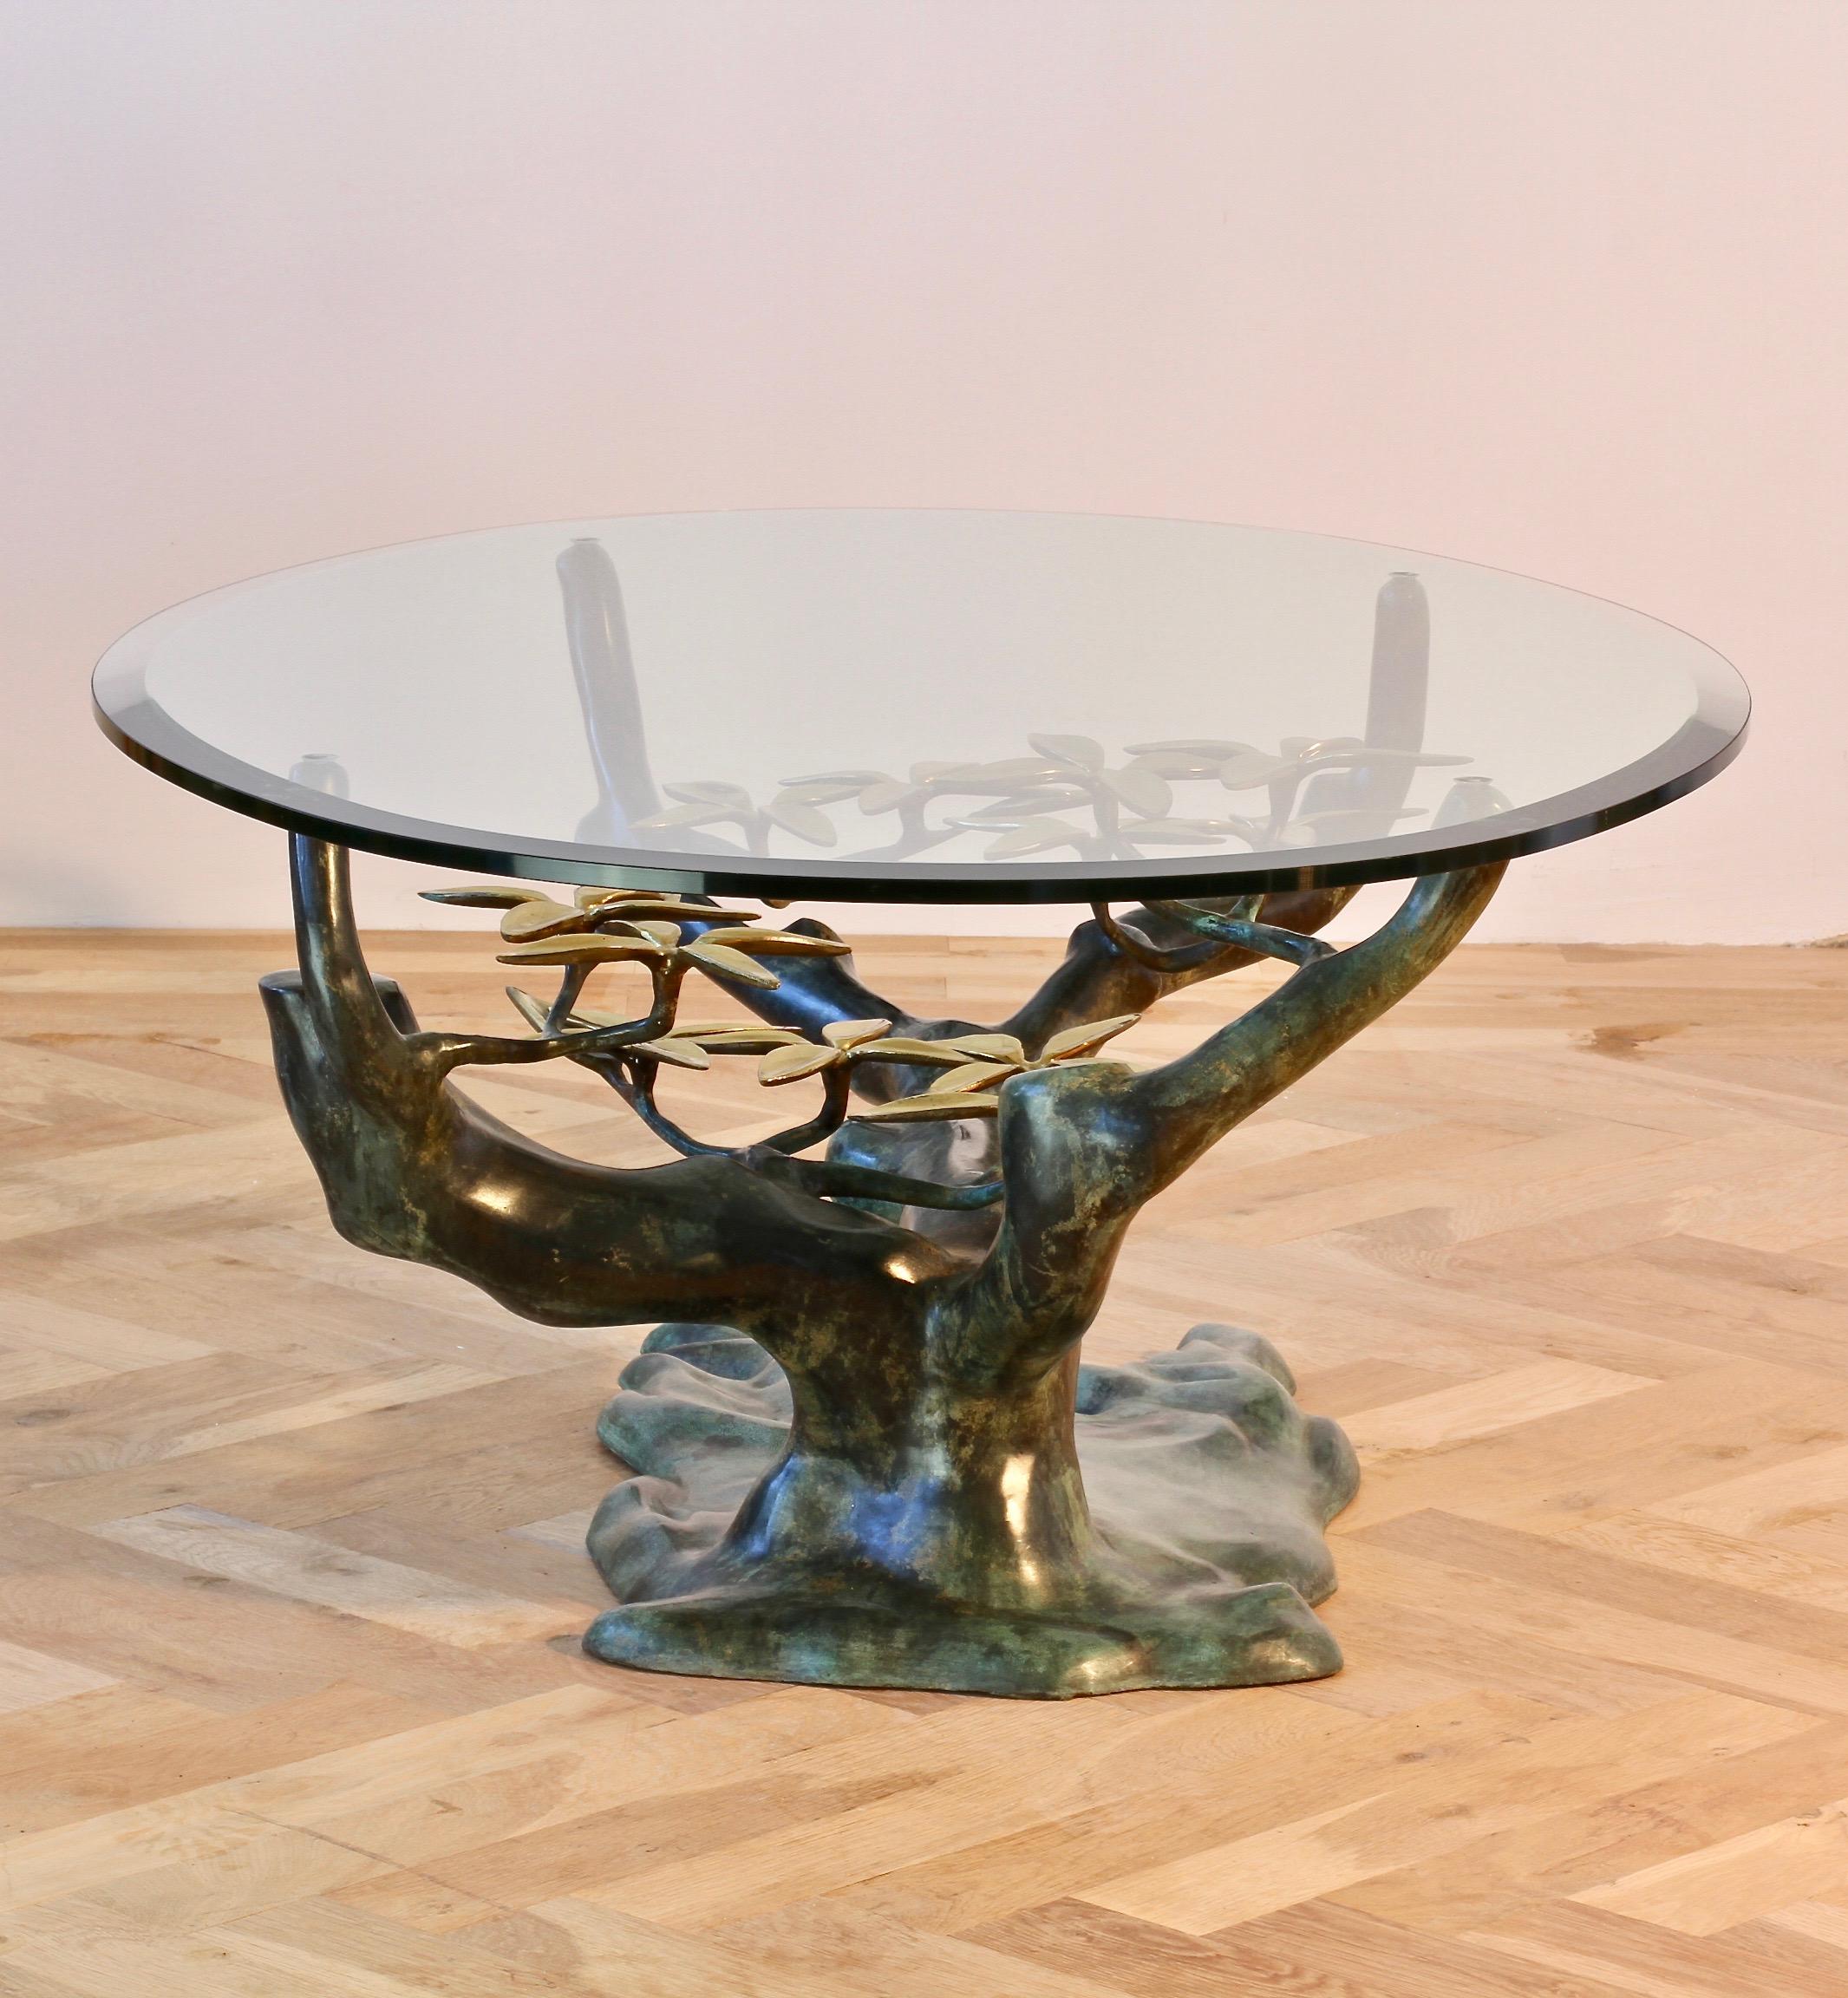 20th Century Cast Patinated Brass and Glass 'Bonsai' Tree Form Coffee Table c.1980s Belgium